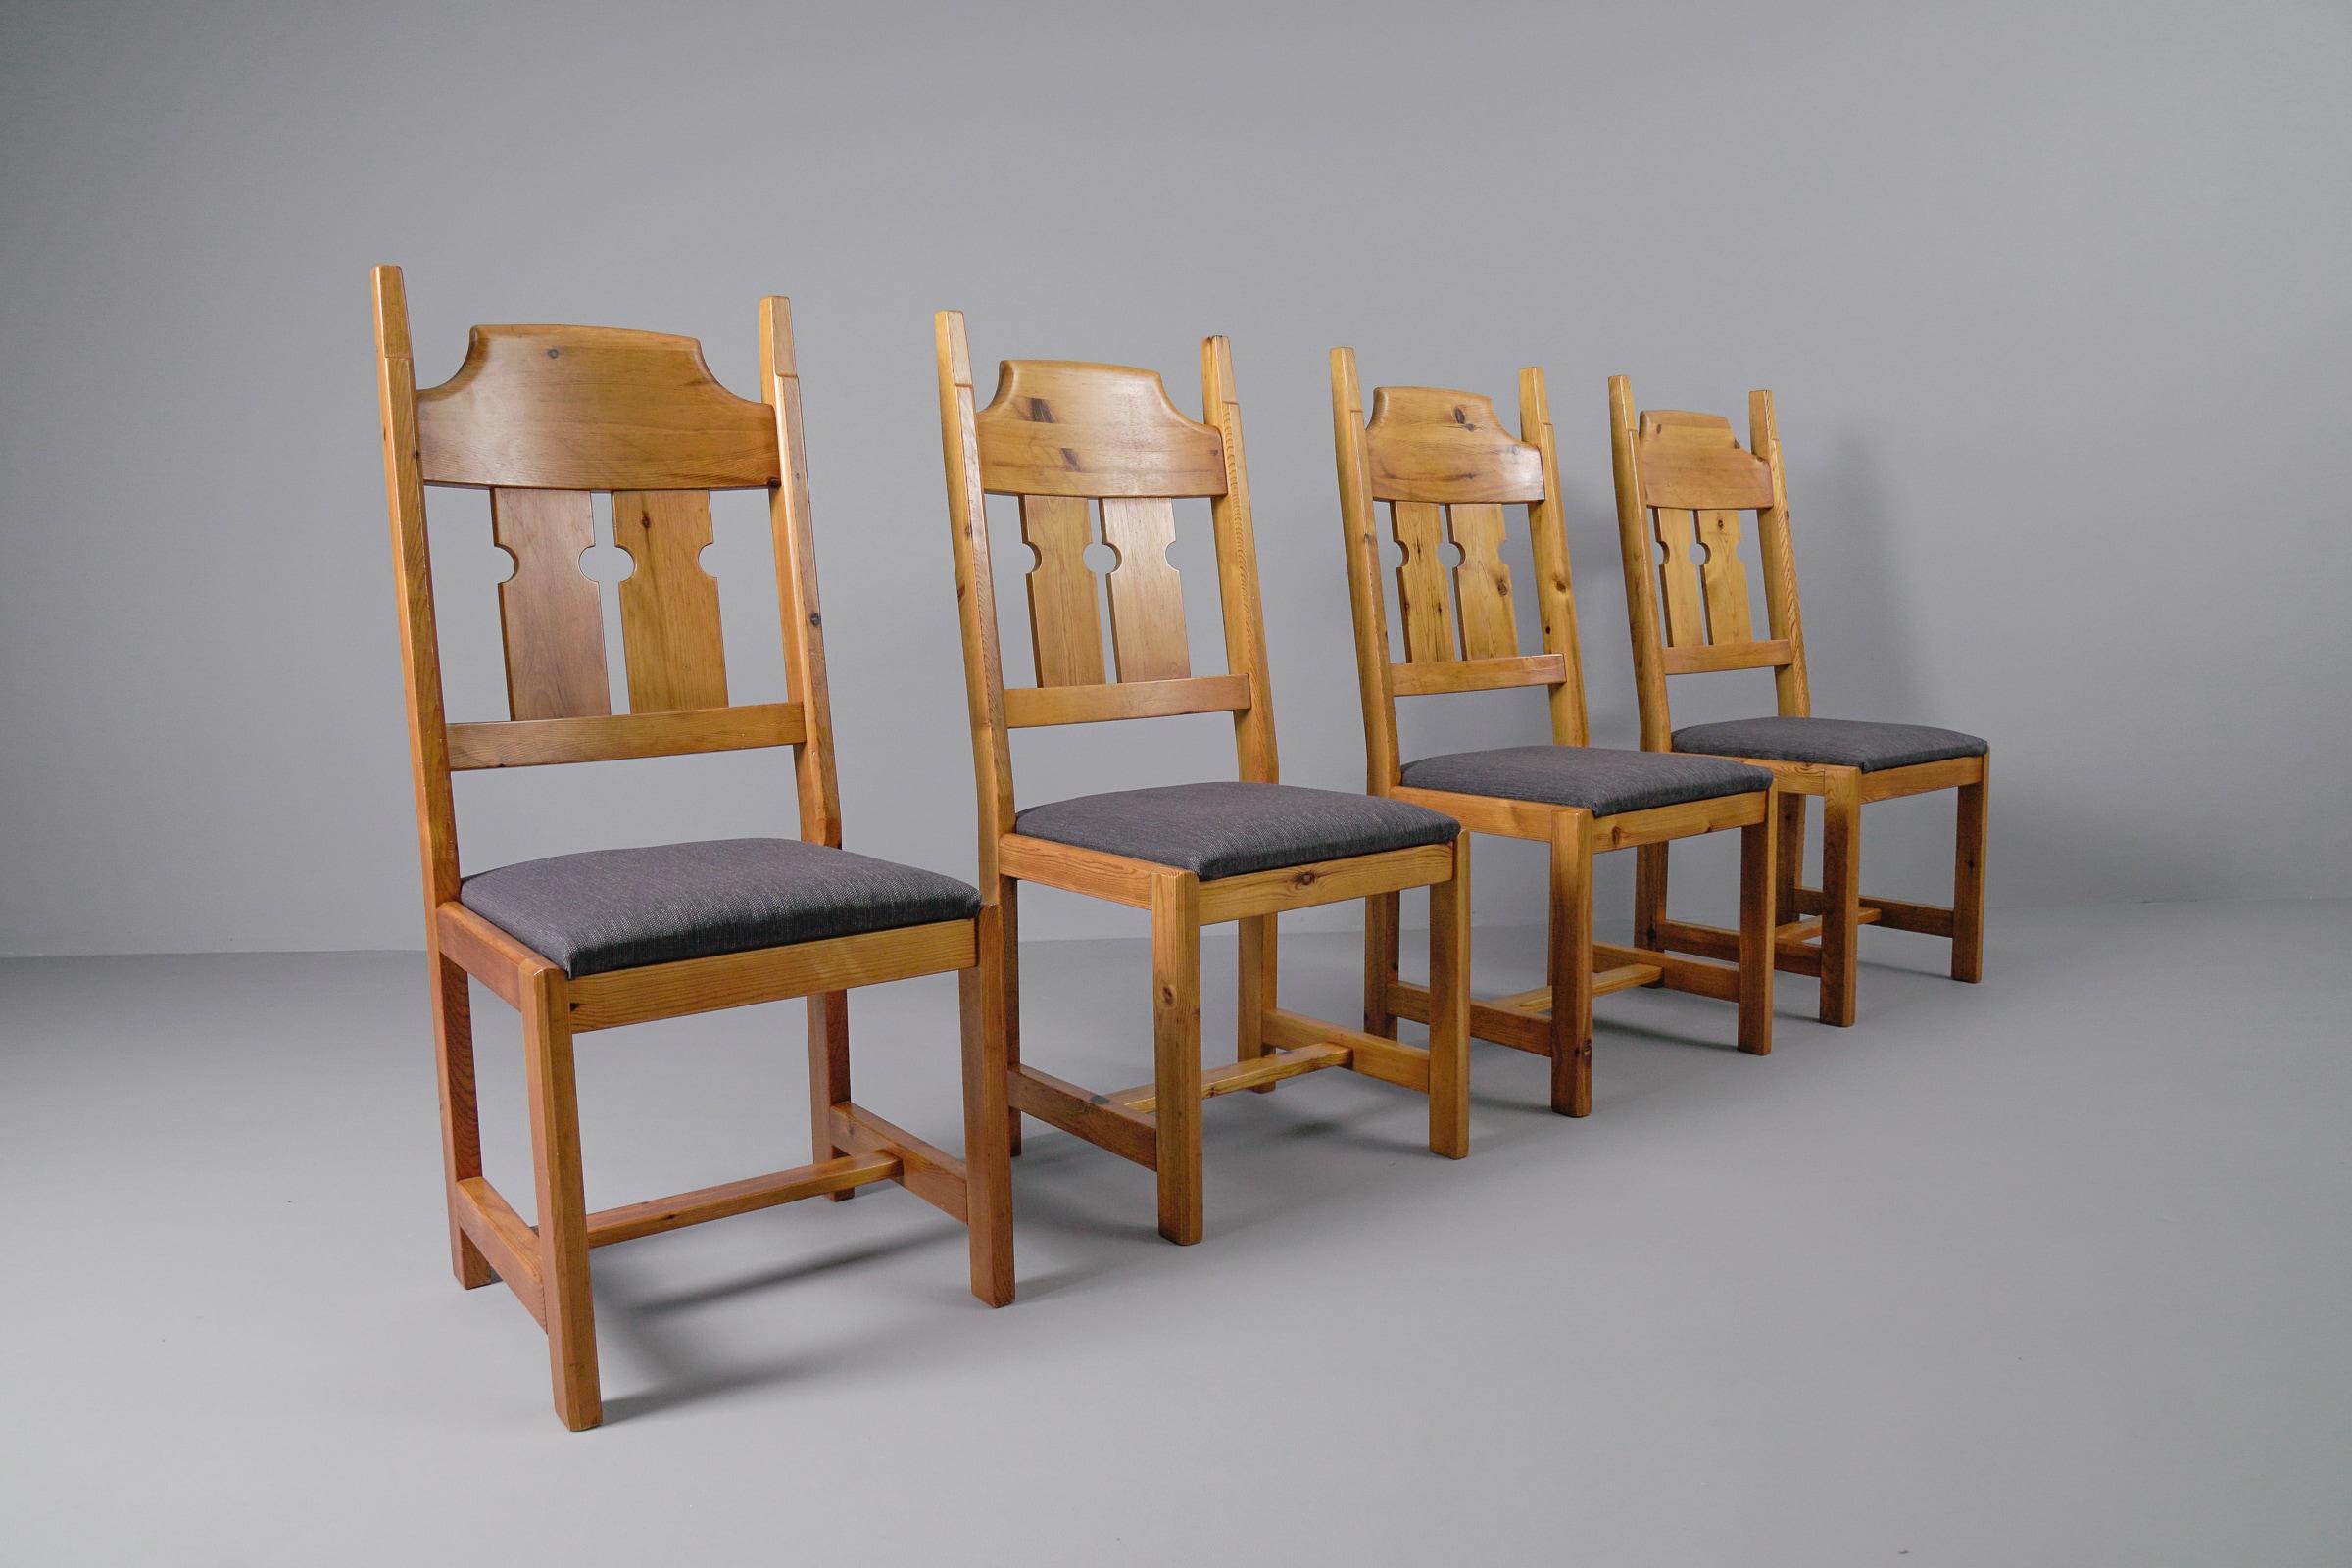 Scandinavian Modern  Set of 4 Swedish Pine Chairs by Gilbert Marklund for Furusnickarn AB, 1970s For Sale